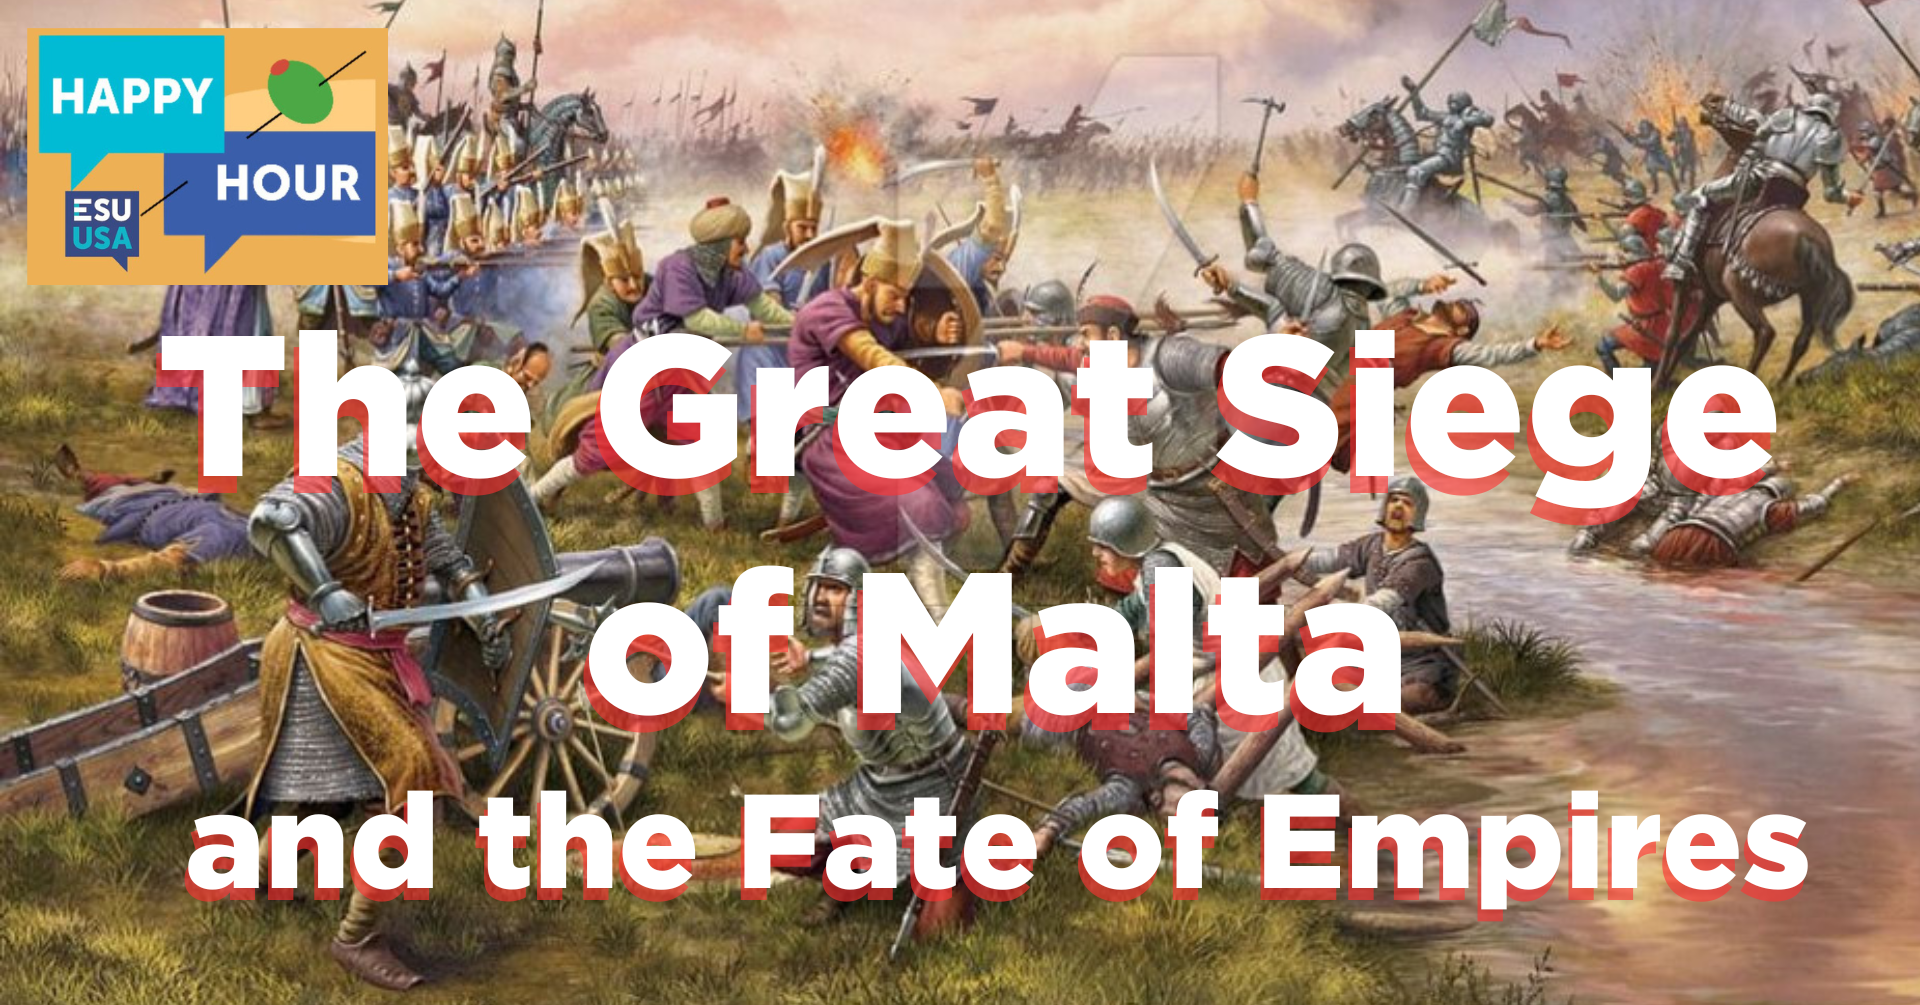 The Great Siege of Malta and the Fate of Empires